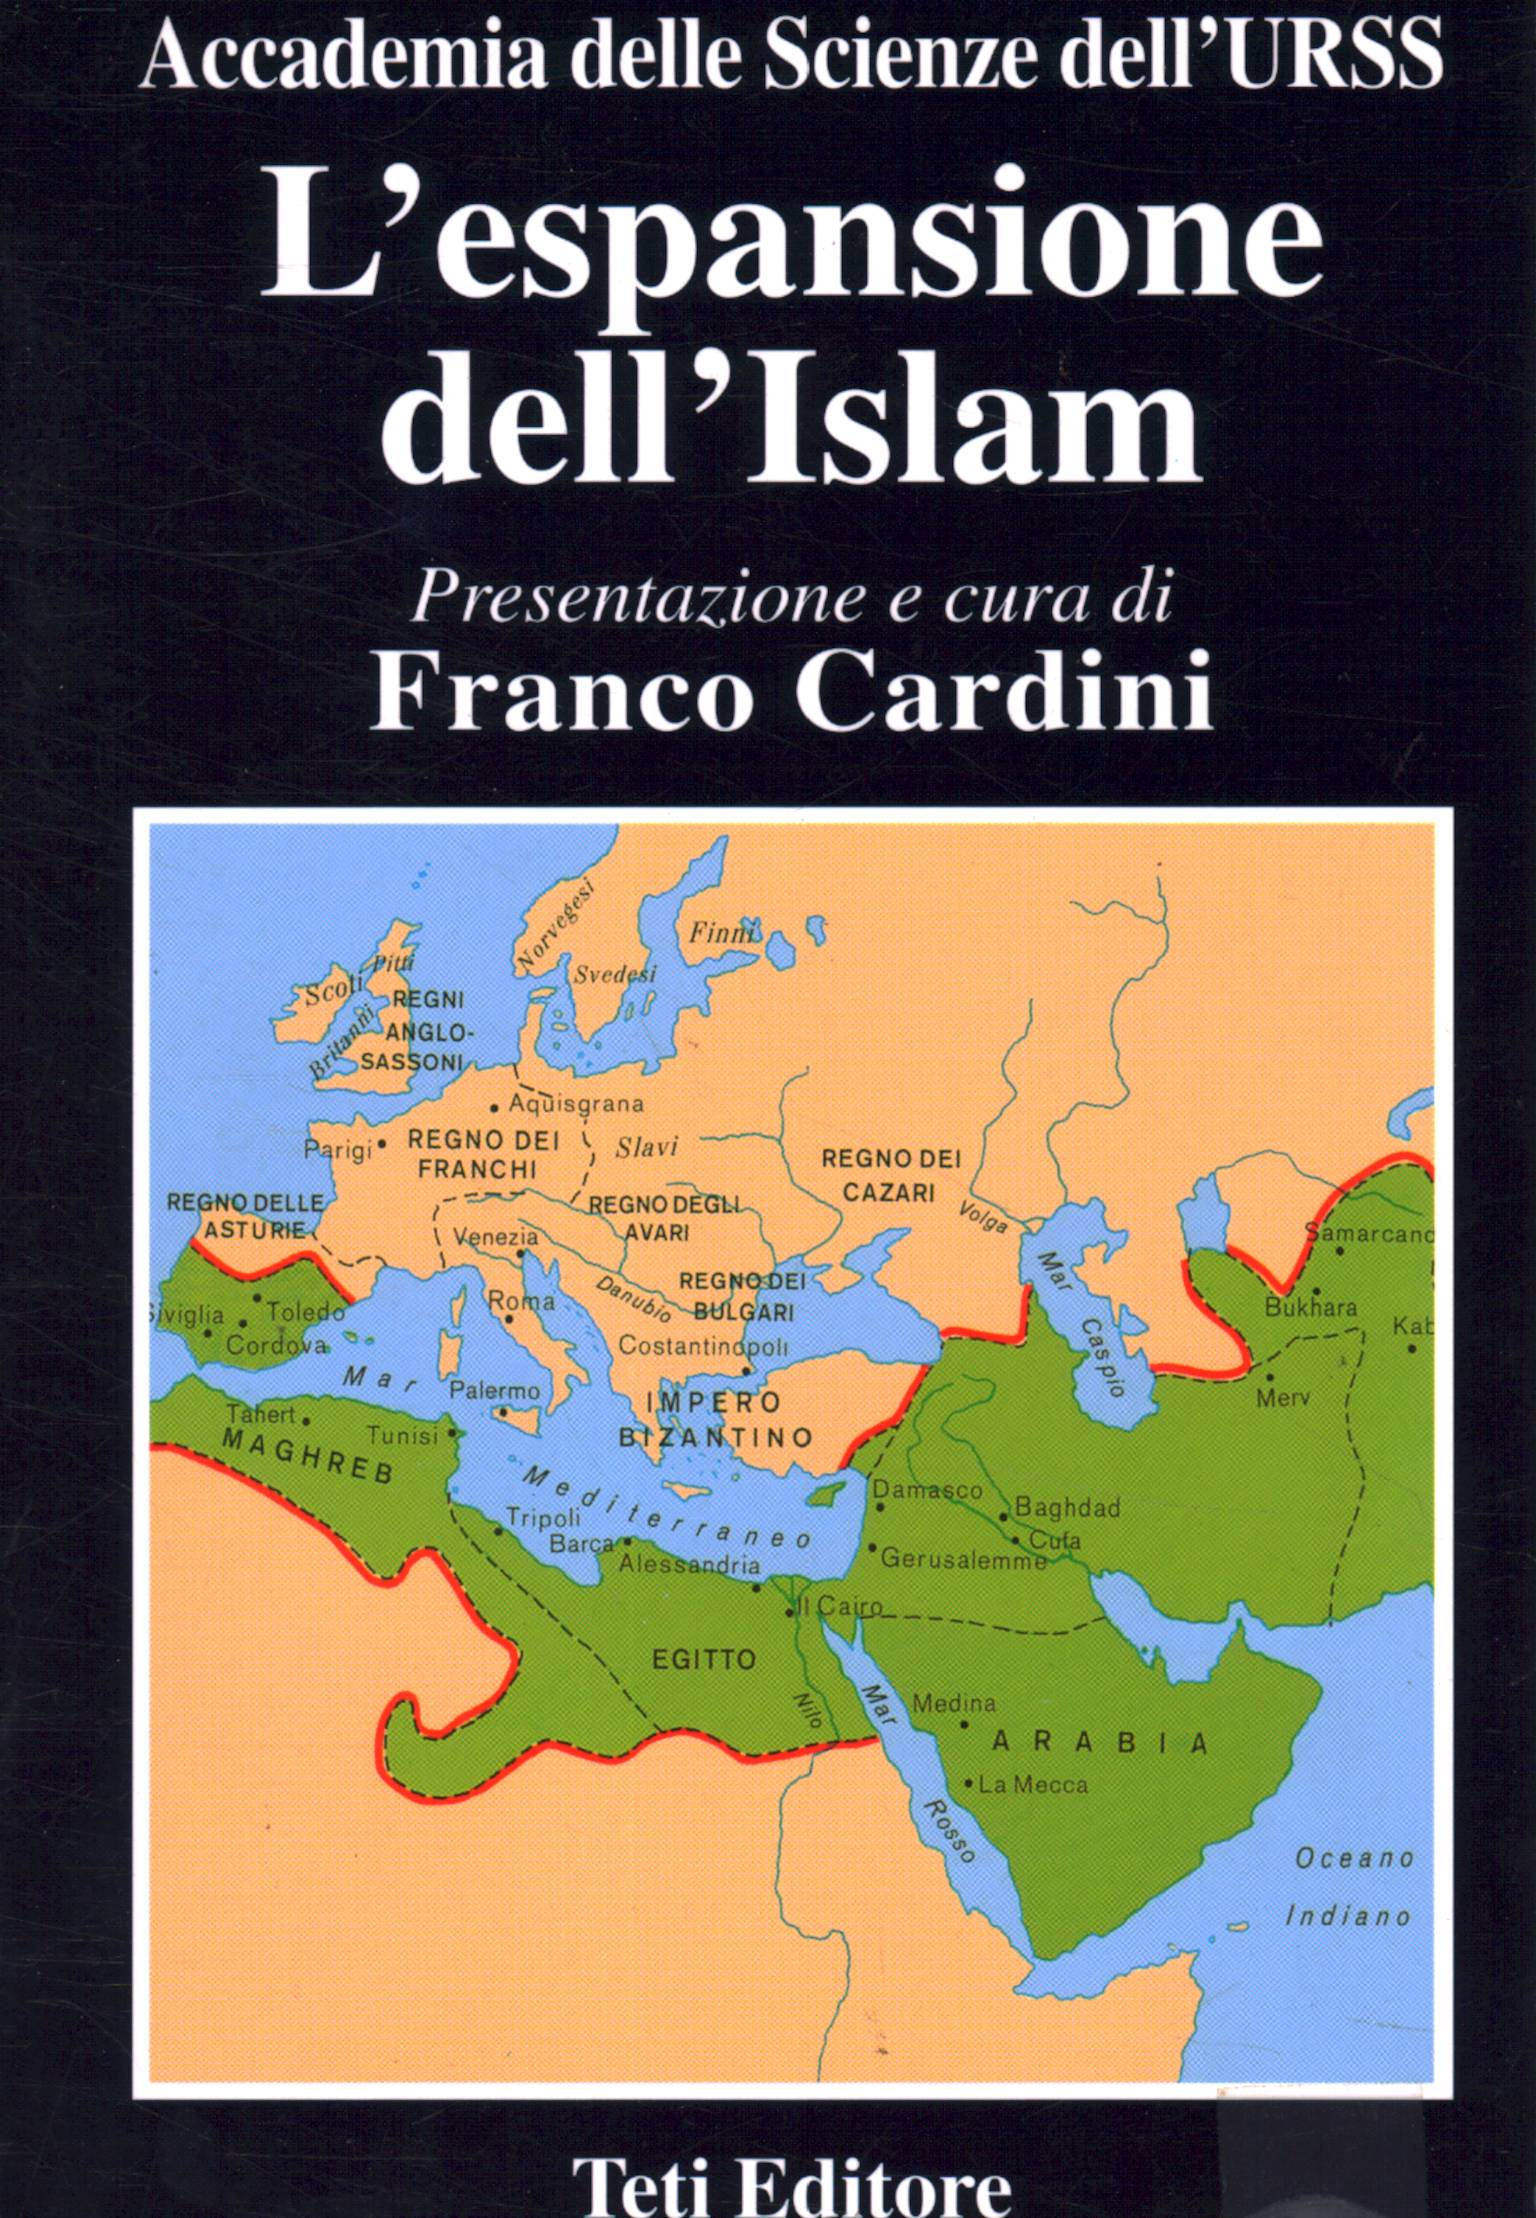 The expansion of Islam